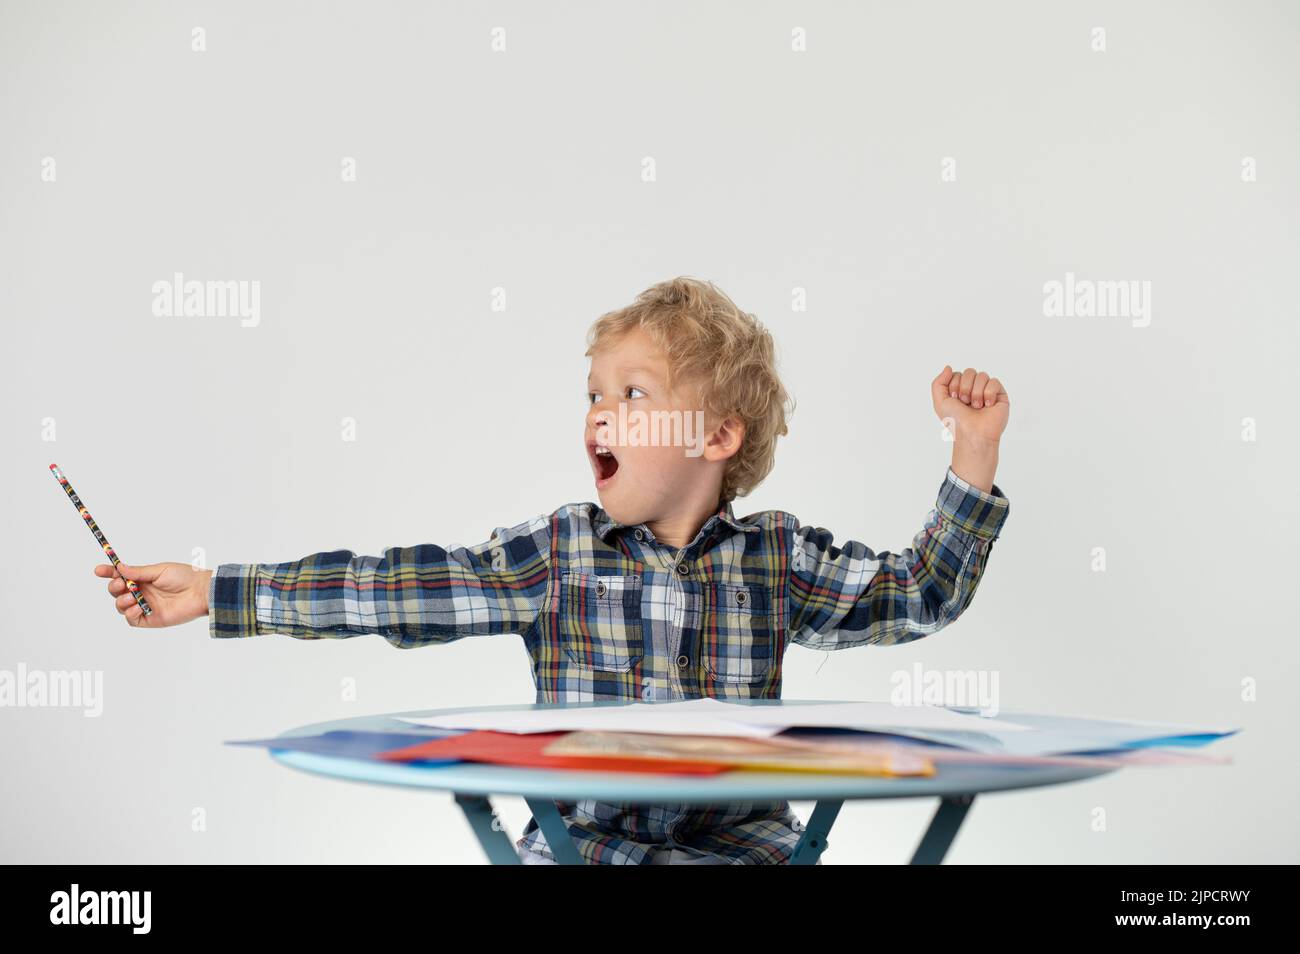 Boy with a pencil yawning at a table, school education Stock Photo